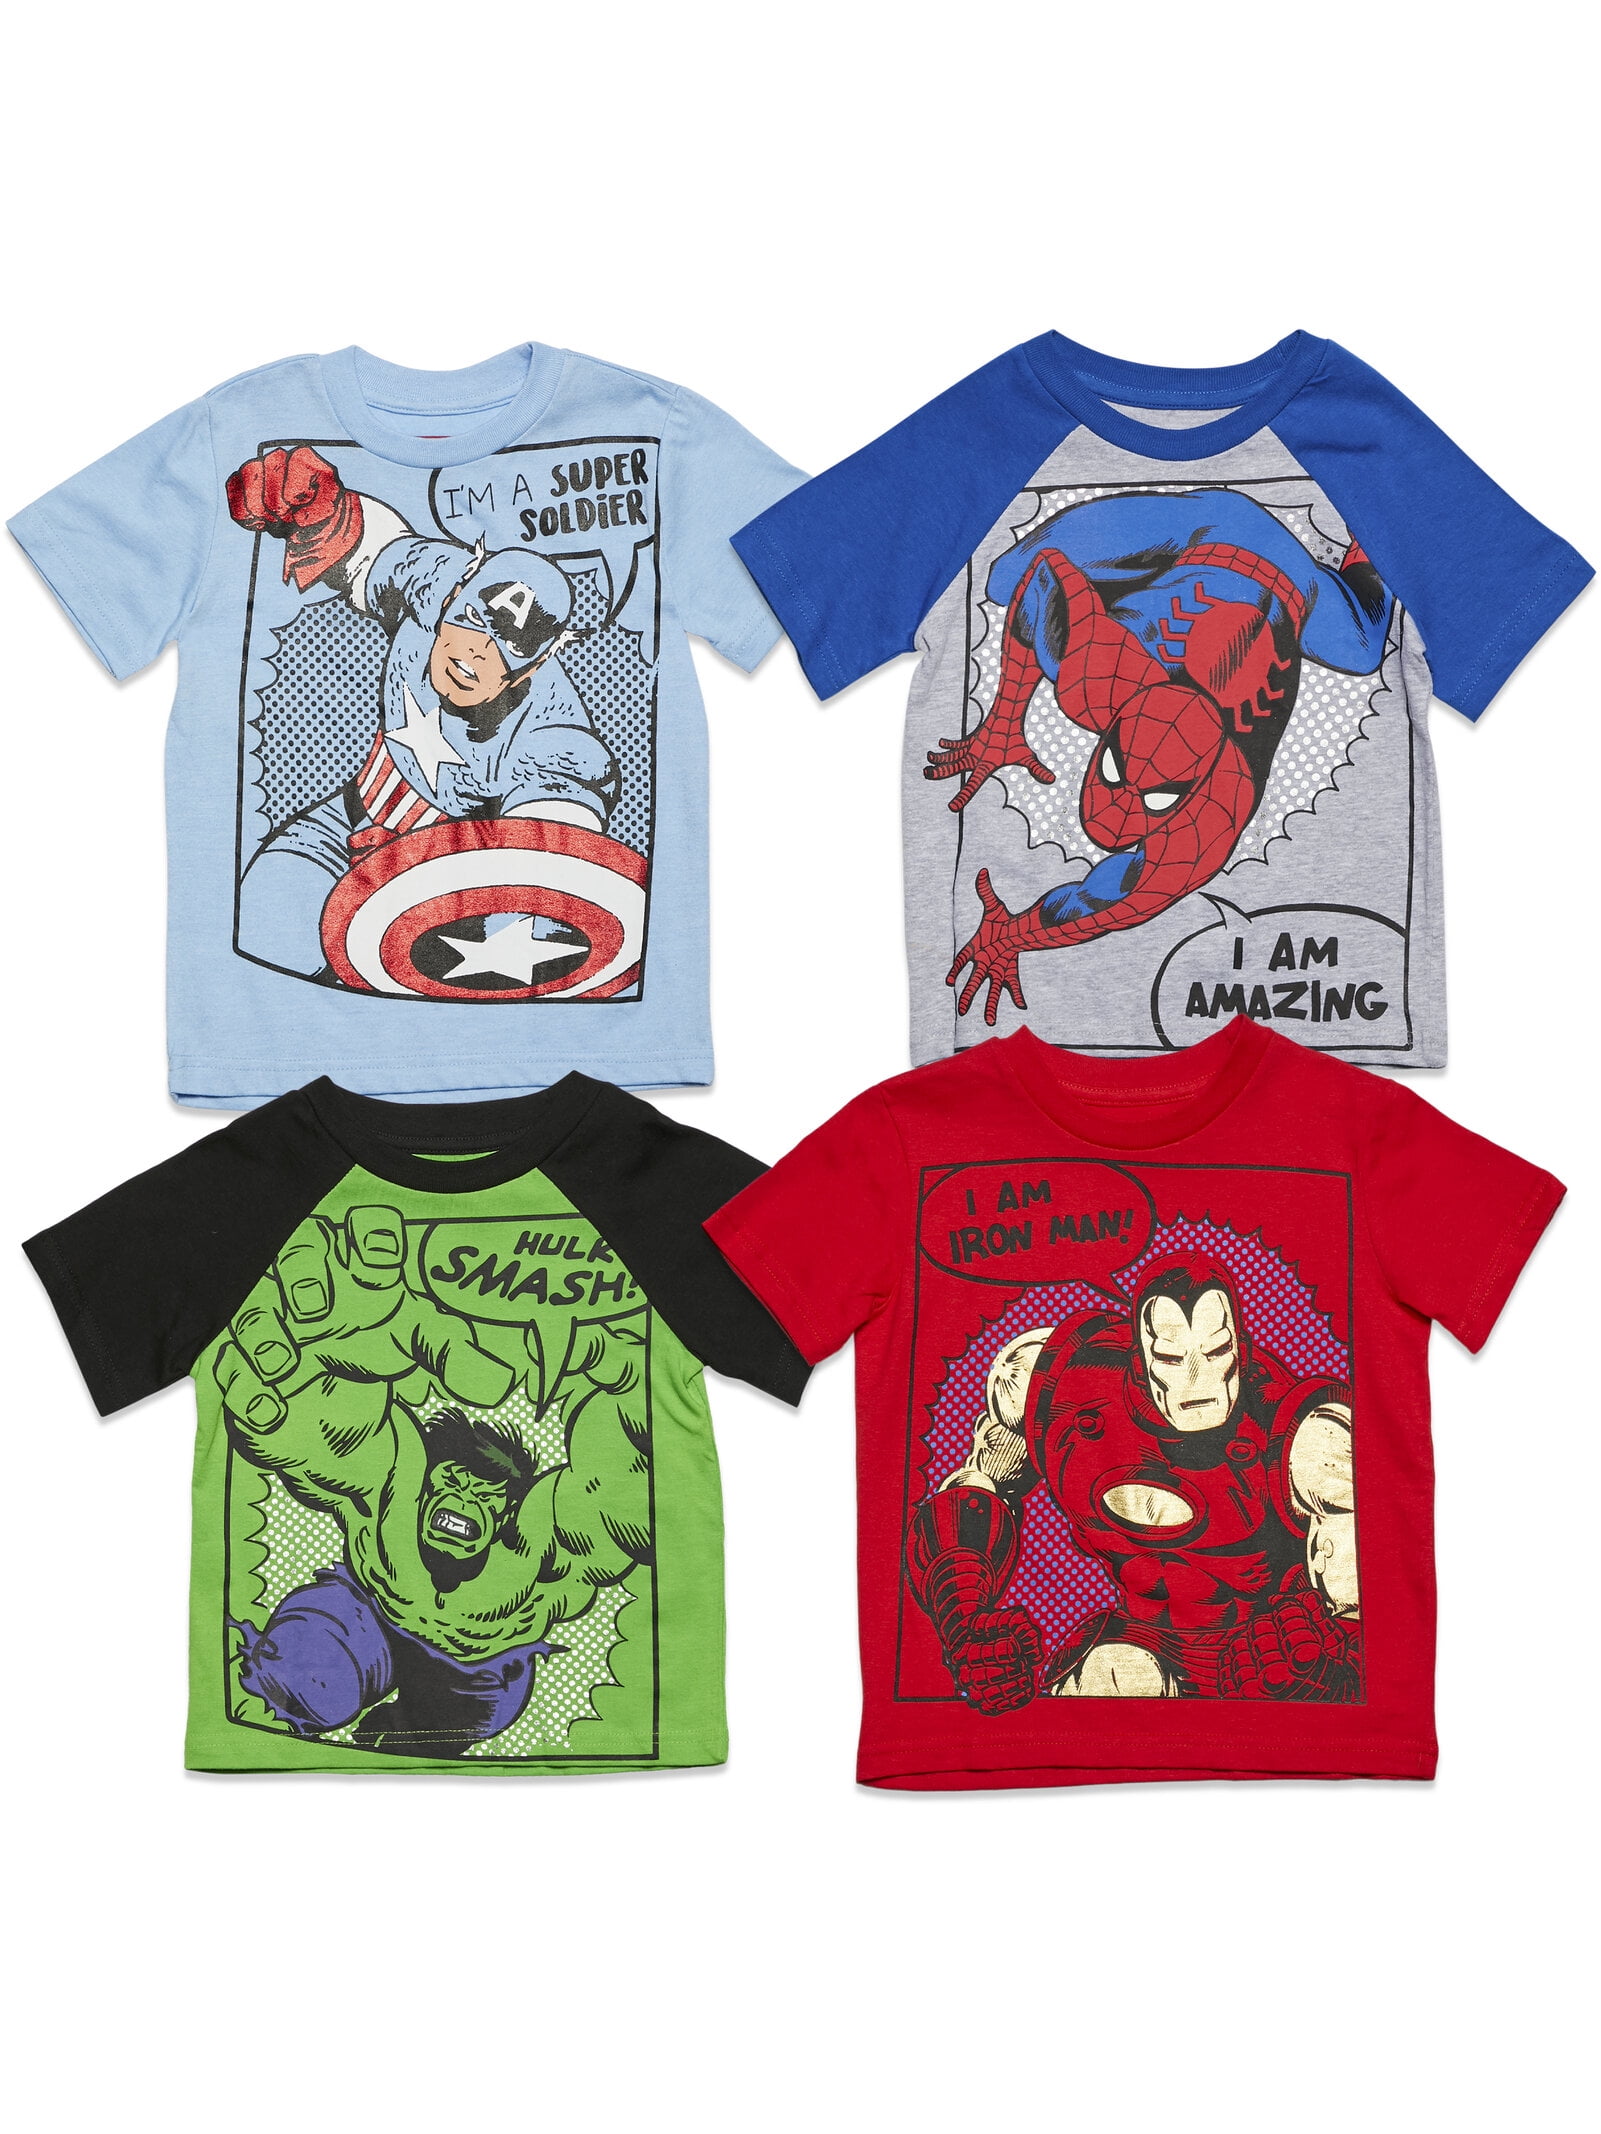 Marvel Avengers Spider-Man Iron Man Big Little Pack America Boys Kid Toddler T-Shirts 4 to Captain